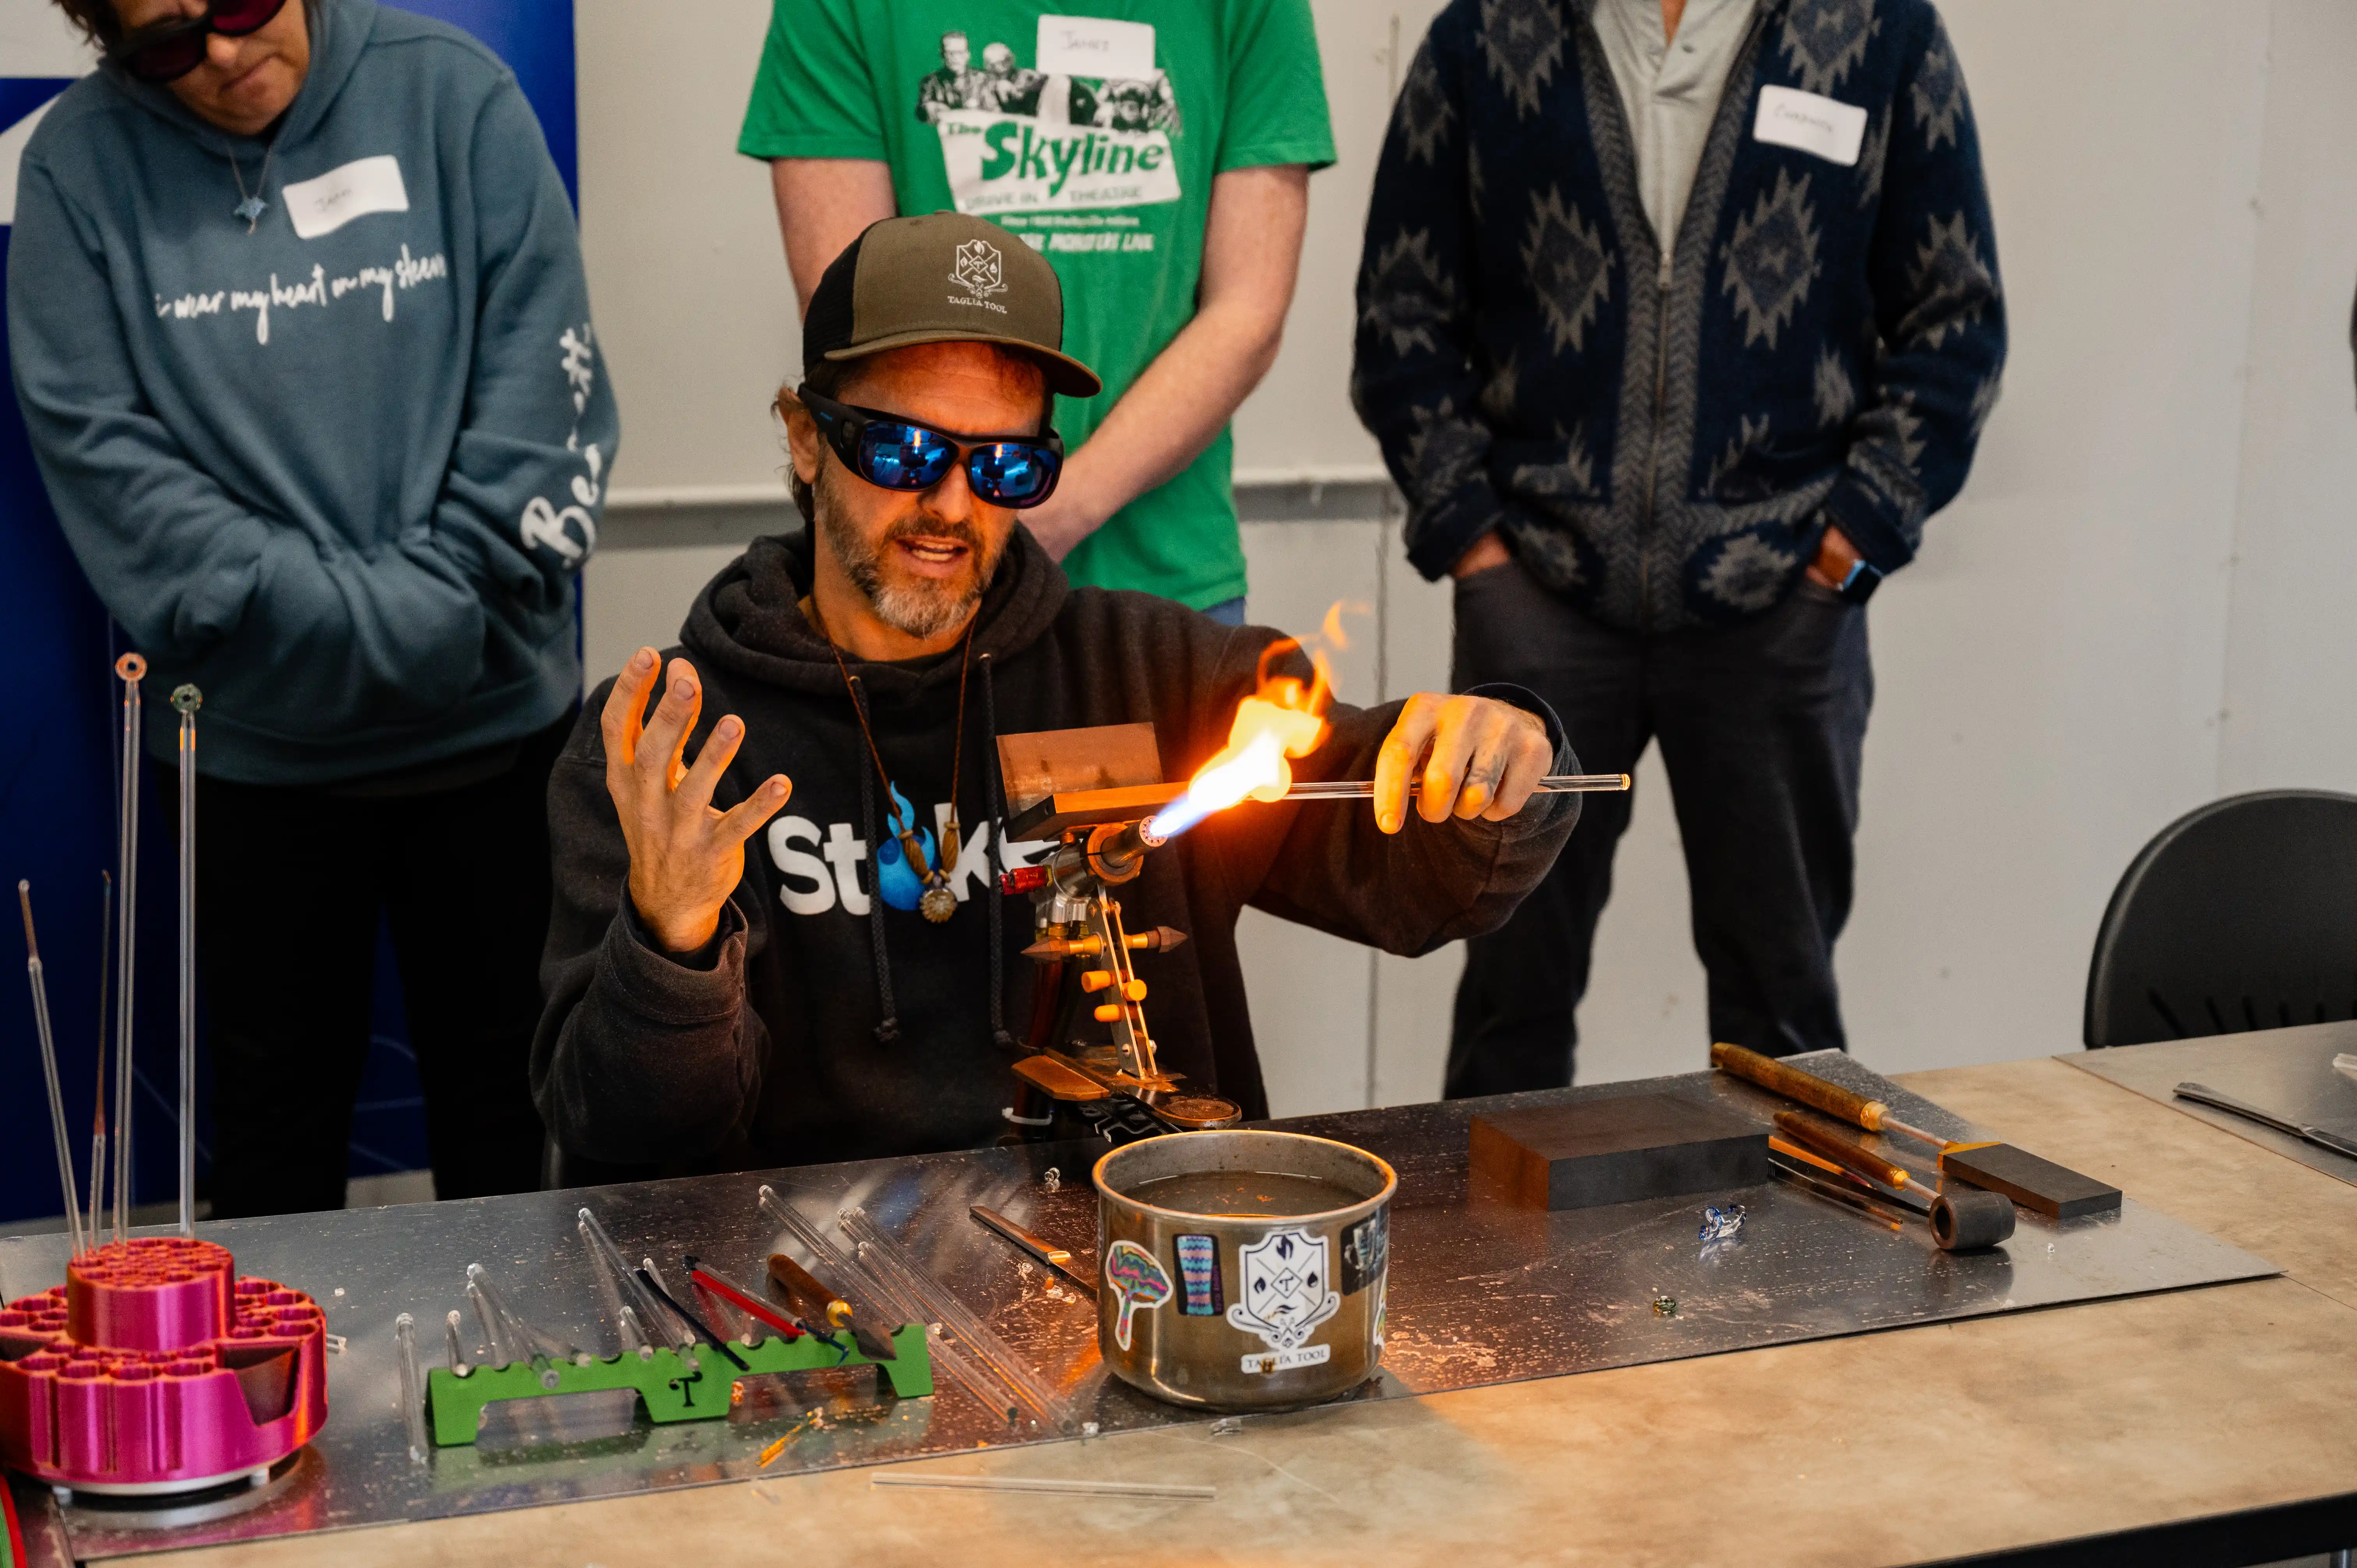 Glassblower demonstrating techniques with a torch and molten glass in a workshop setting, surrounded by various glassblowing tools, with onlookers wearing glasses.